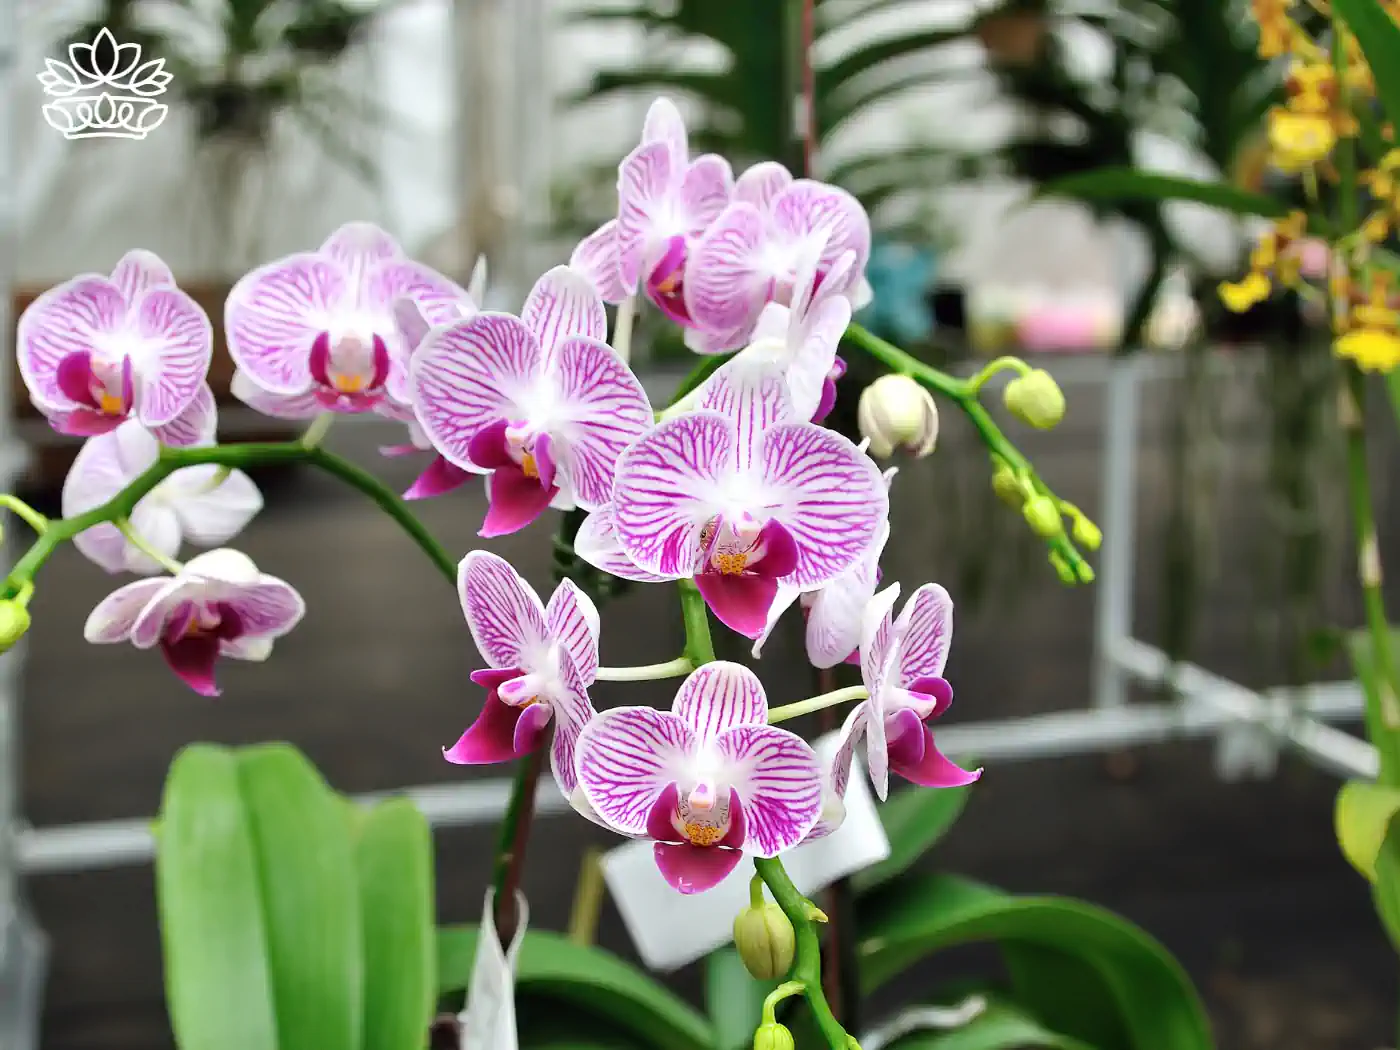 Close-up of pink and white striped orchids blooming in a greenhouse. Fabulous Flowers and Gifts - Orchids Collection.